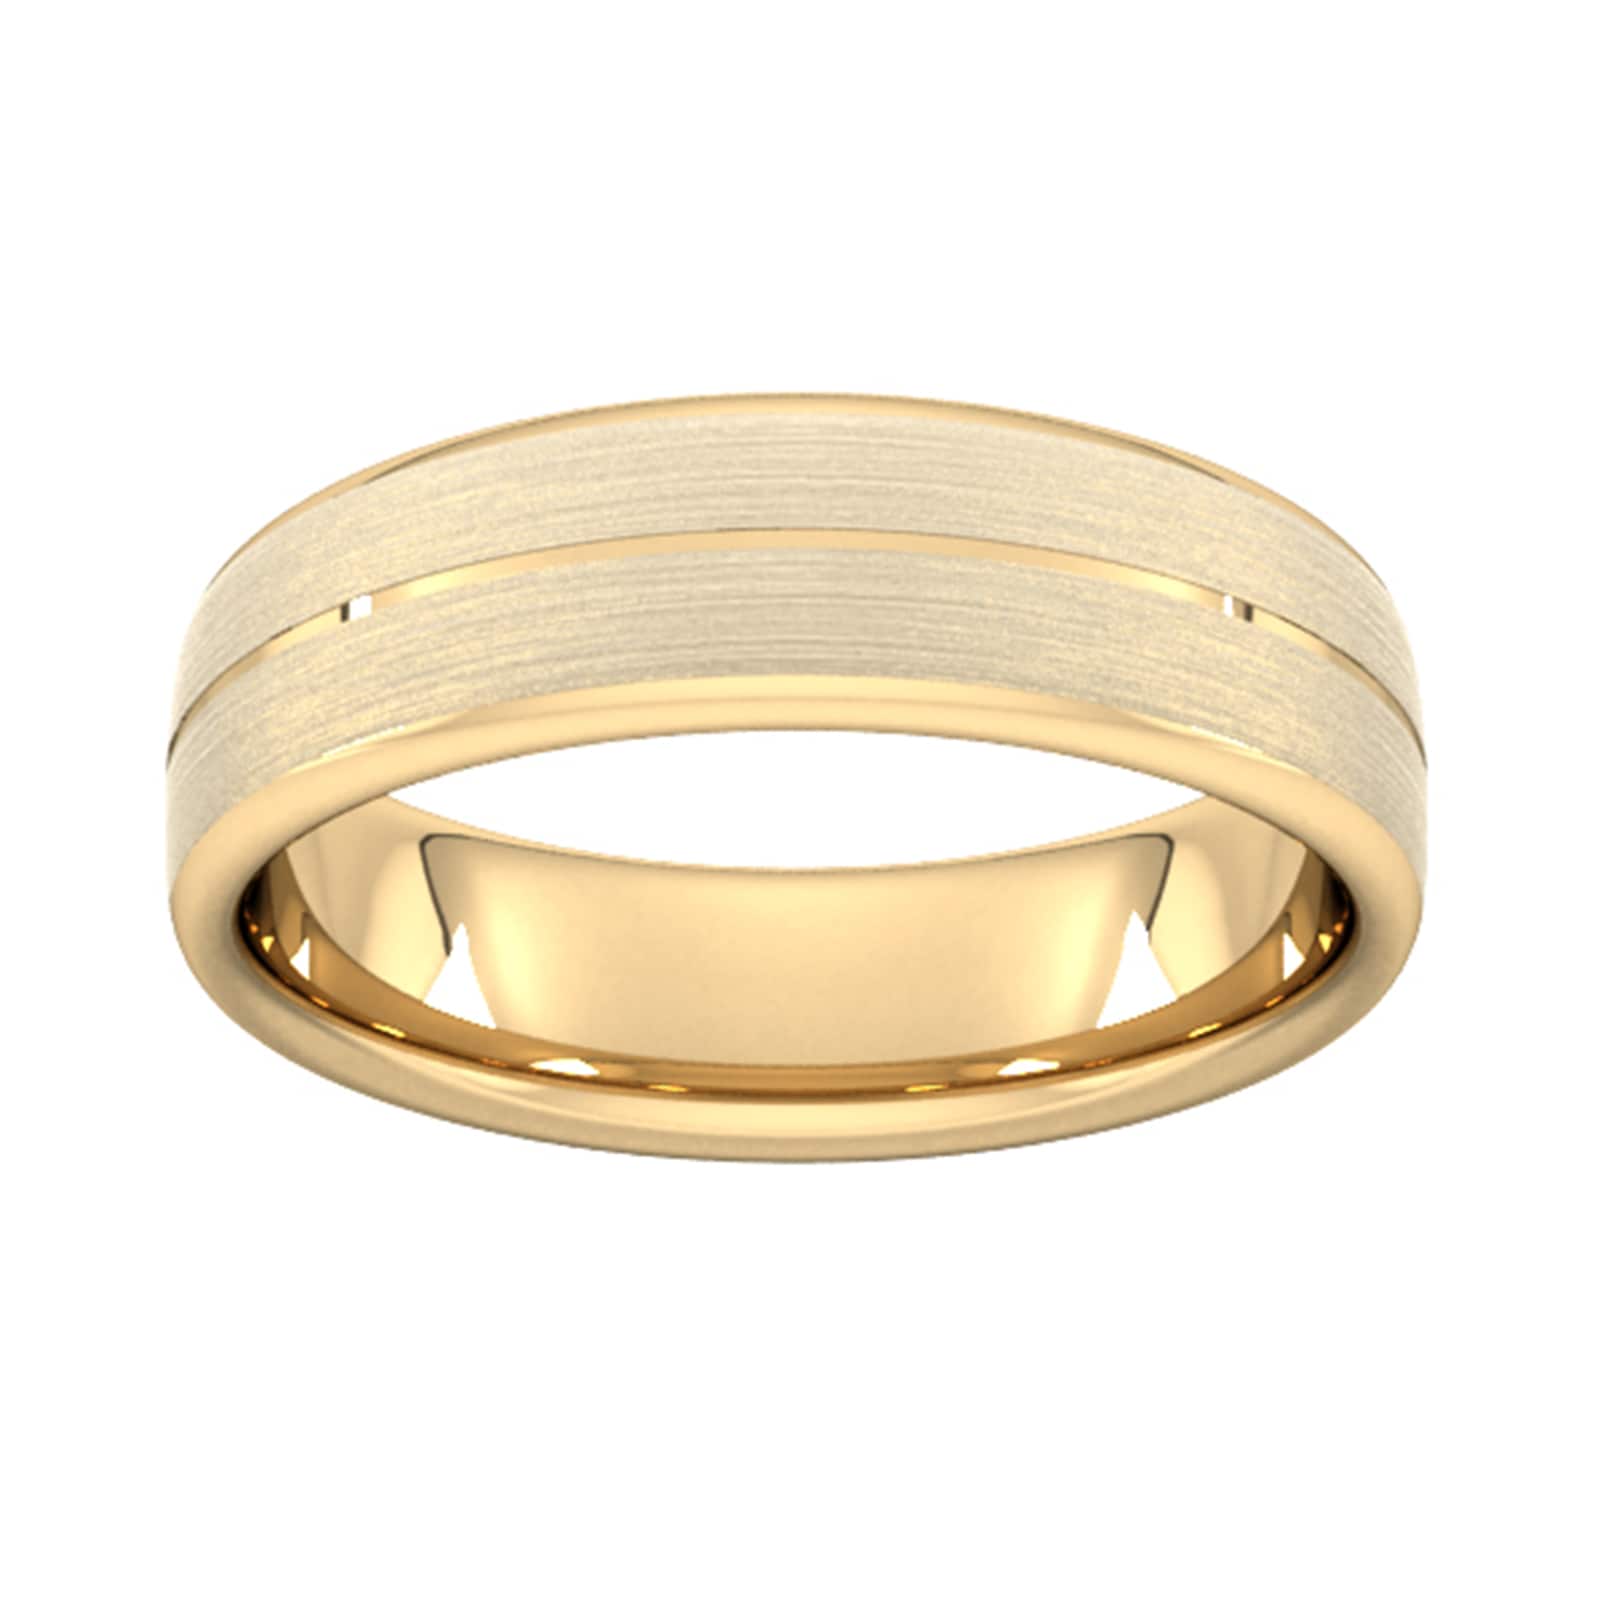 6mm D Shape Standard Centre Groove With Chamfered Edge Wedding Ring In 18 Carat Yellow Gold - Ring Size U